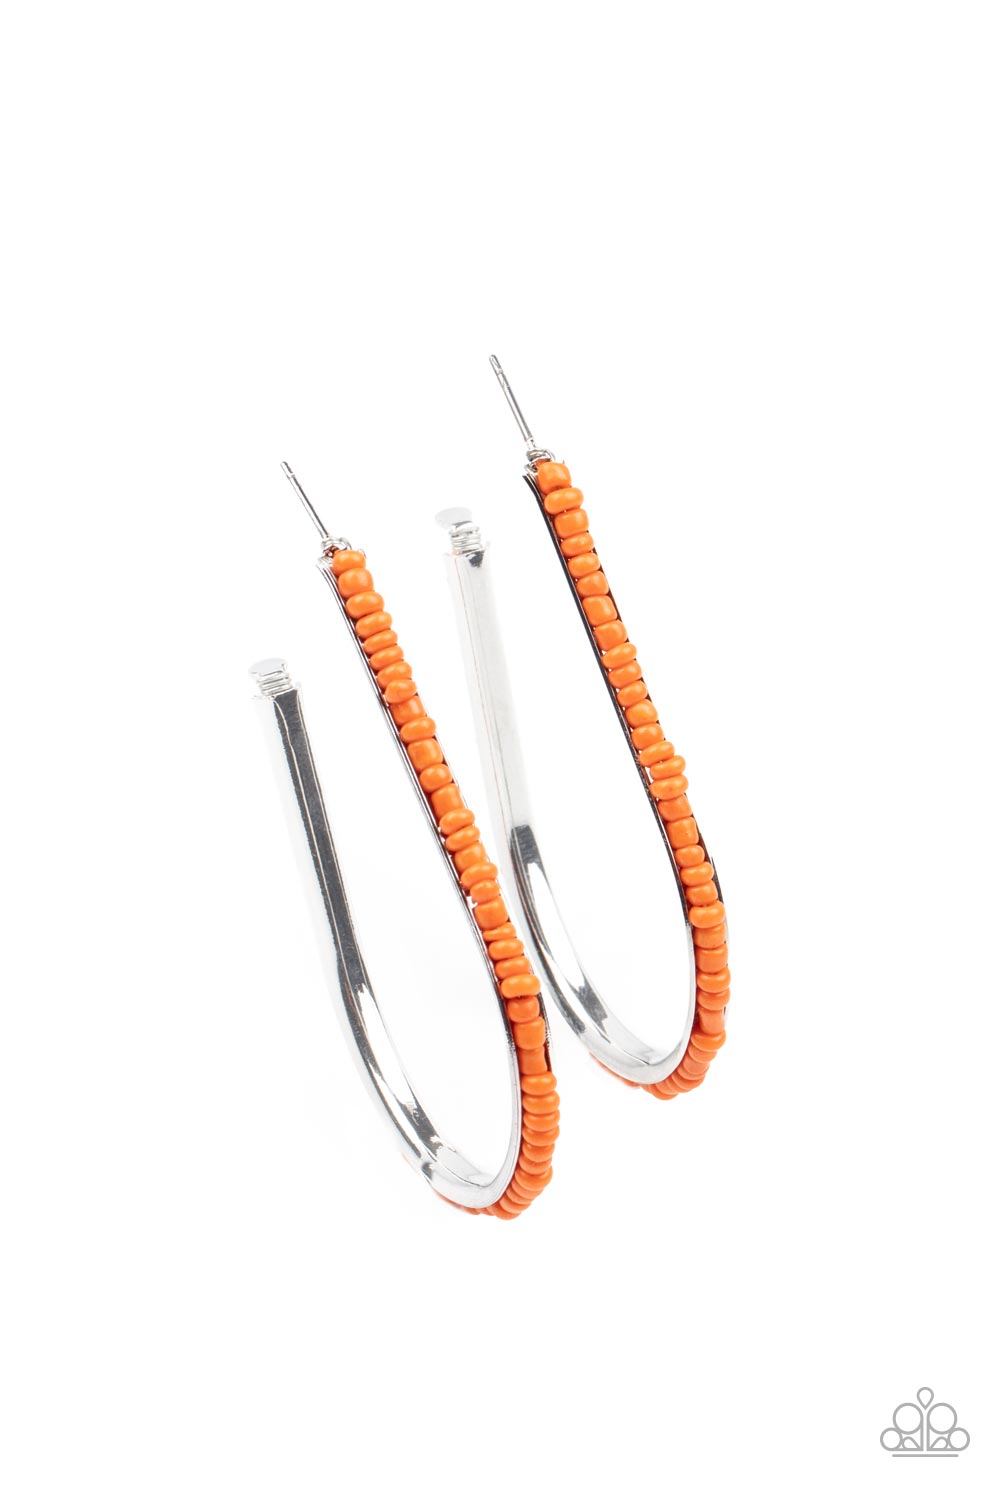 A dainty collection of orange seed beads embellish the beveled spine of a silver hook shaped hoop, creating a trendy pop of color. Hoop measures approximately 1 1/2" in diameter. Earring attaches to a standard post fitting.